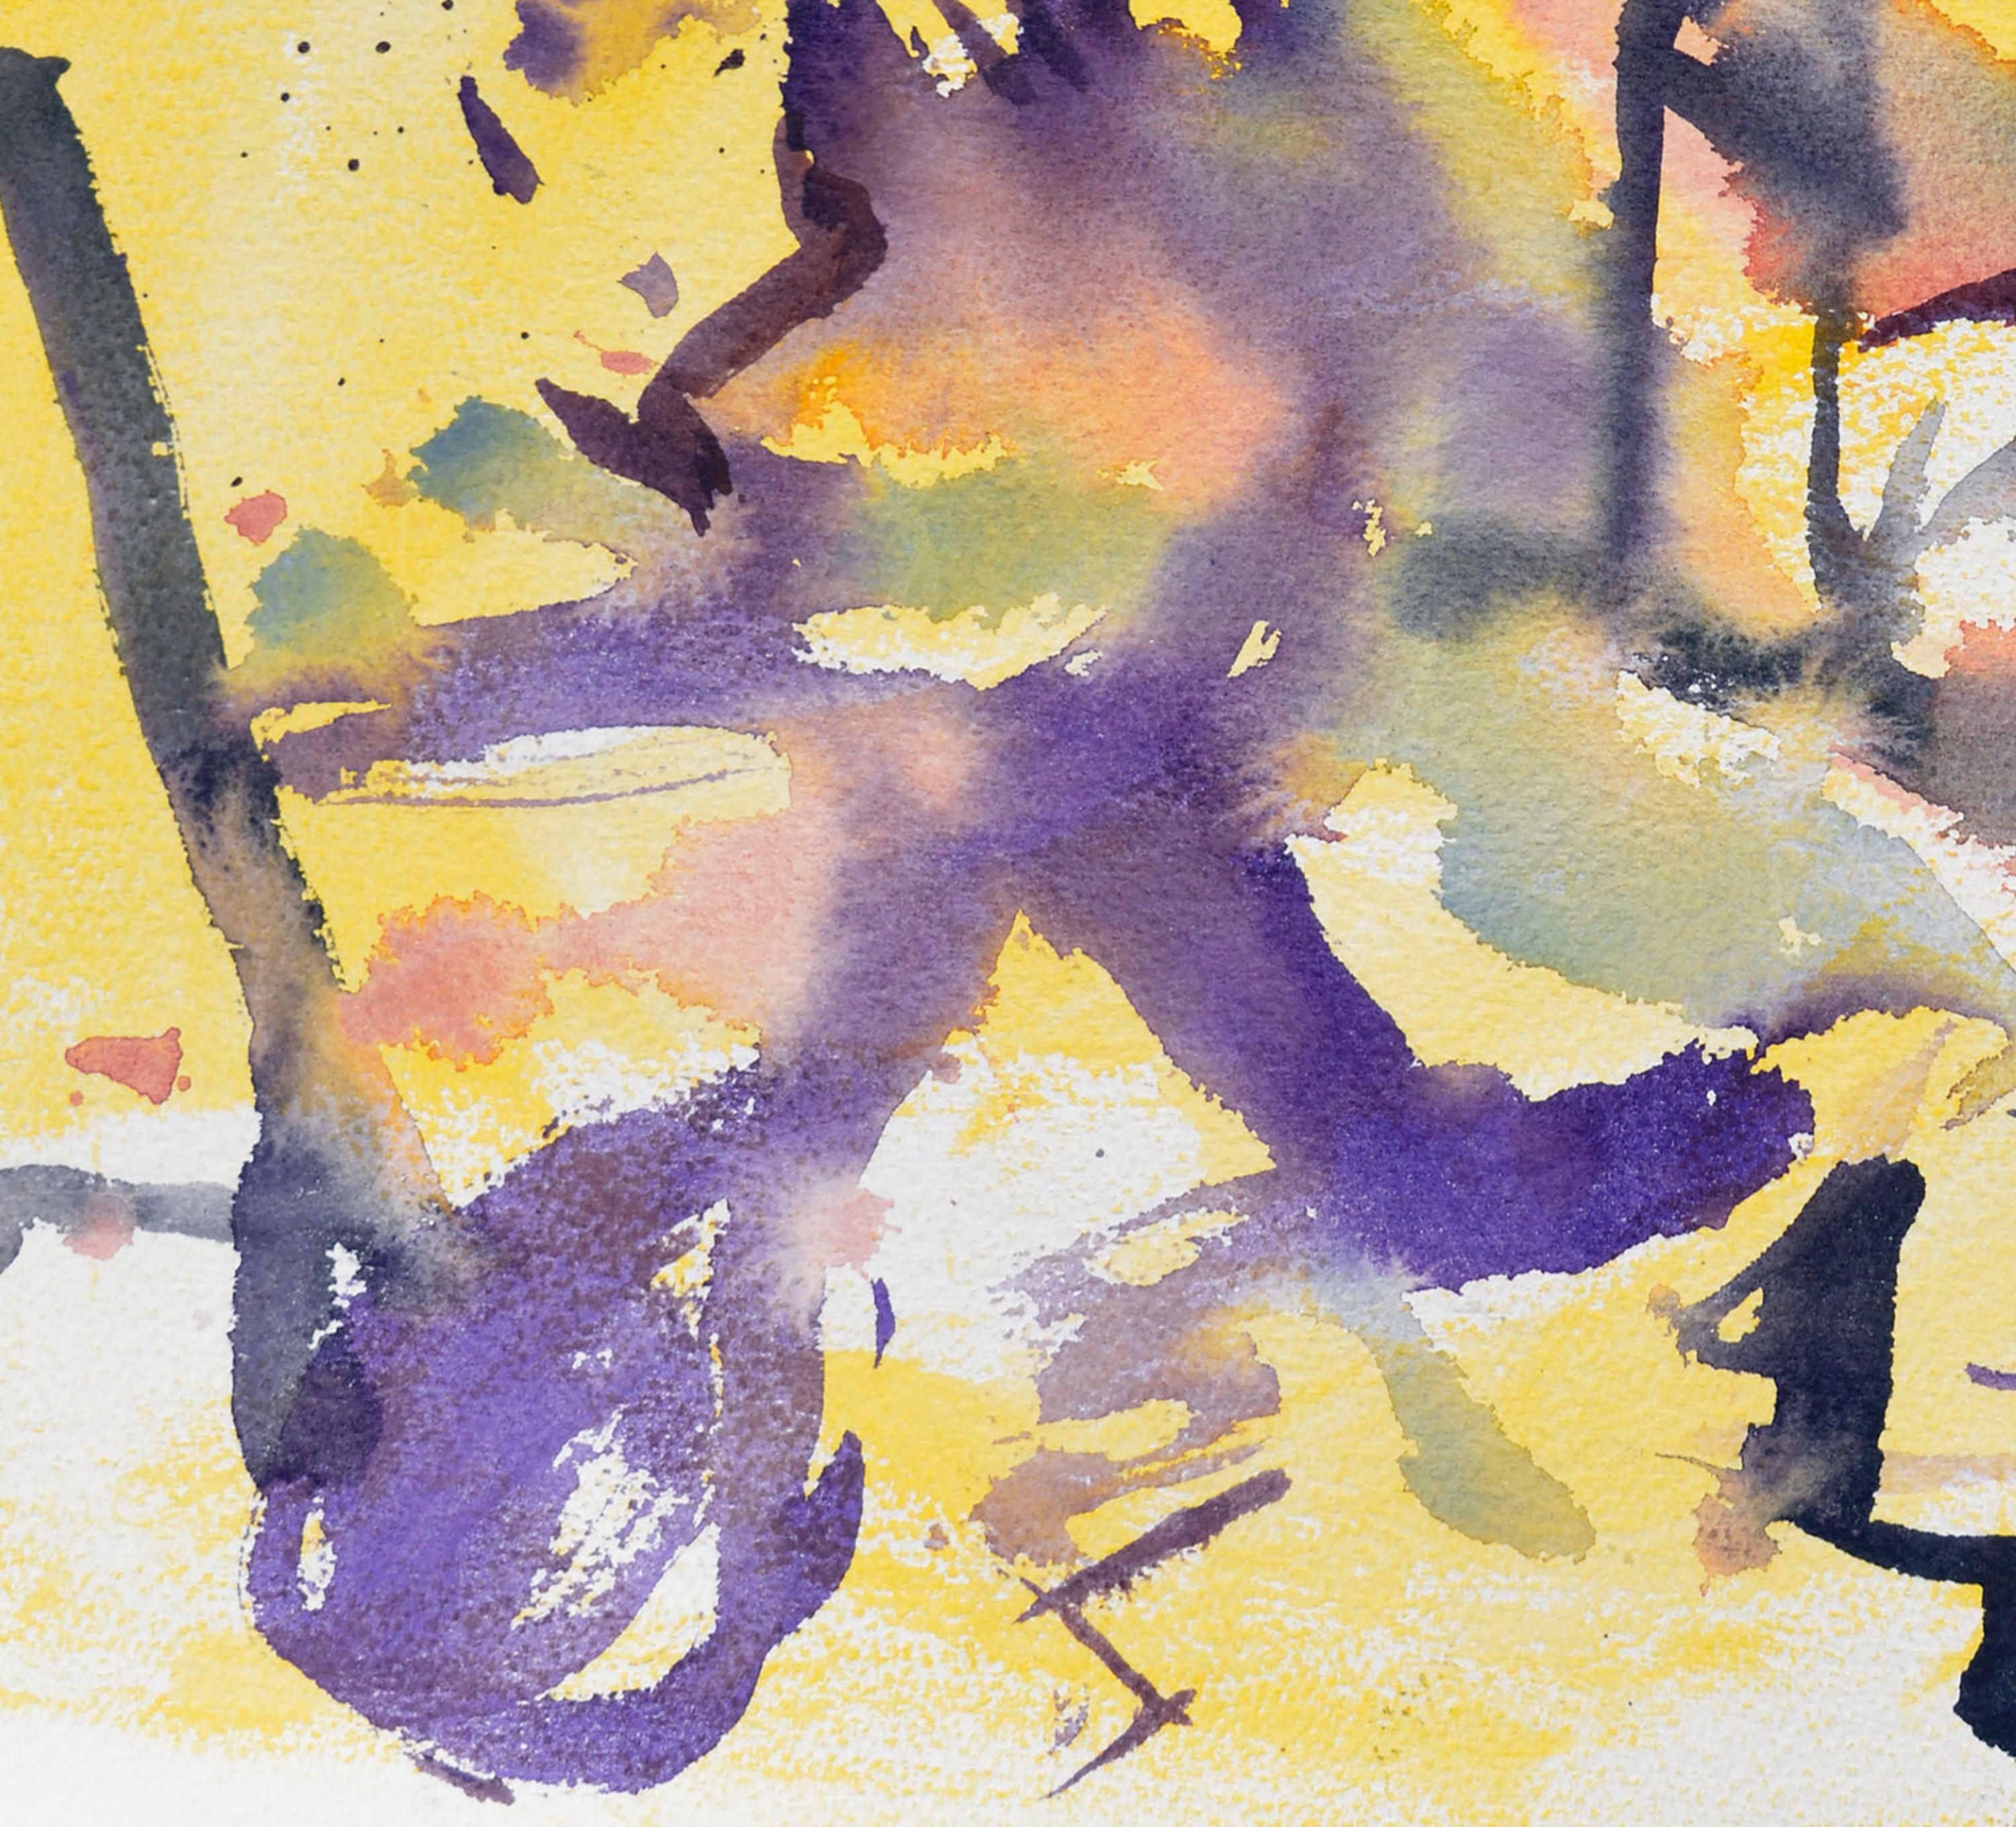 Vintage Purple & Yellow Abstract Watercolor - Abstract Expressionist Art by Les Anderson